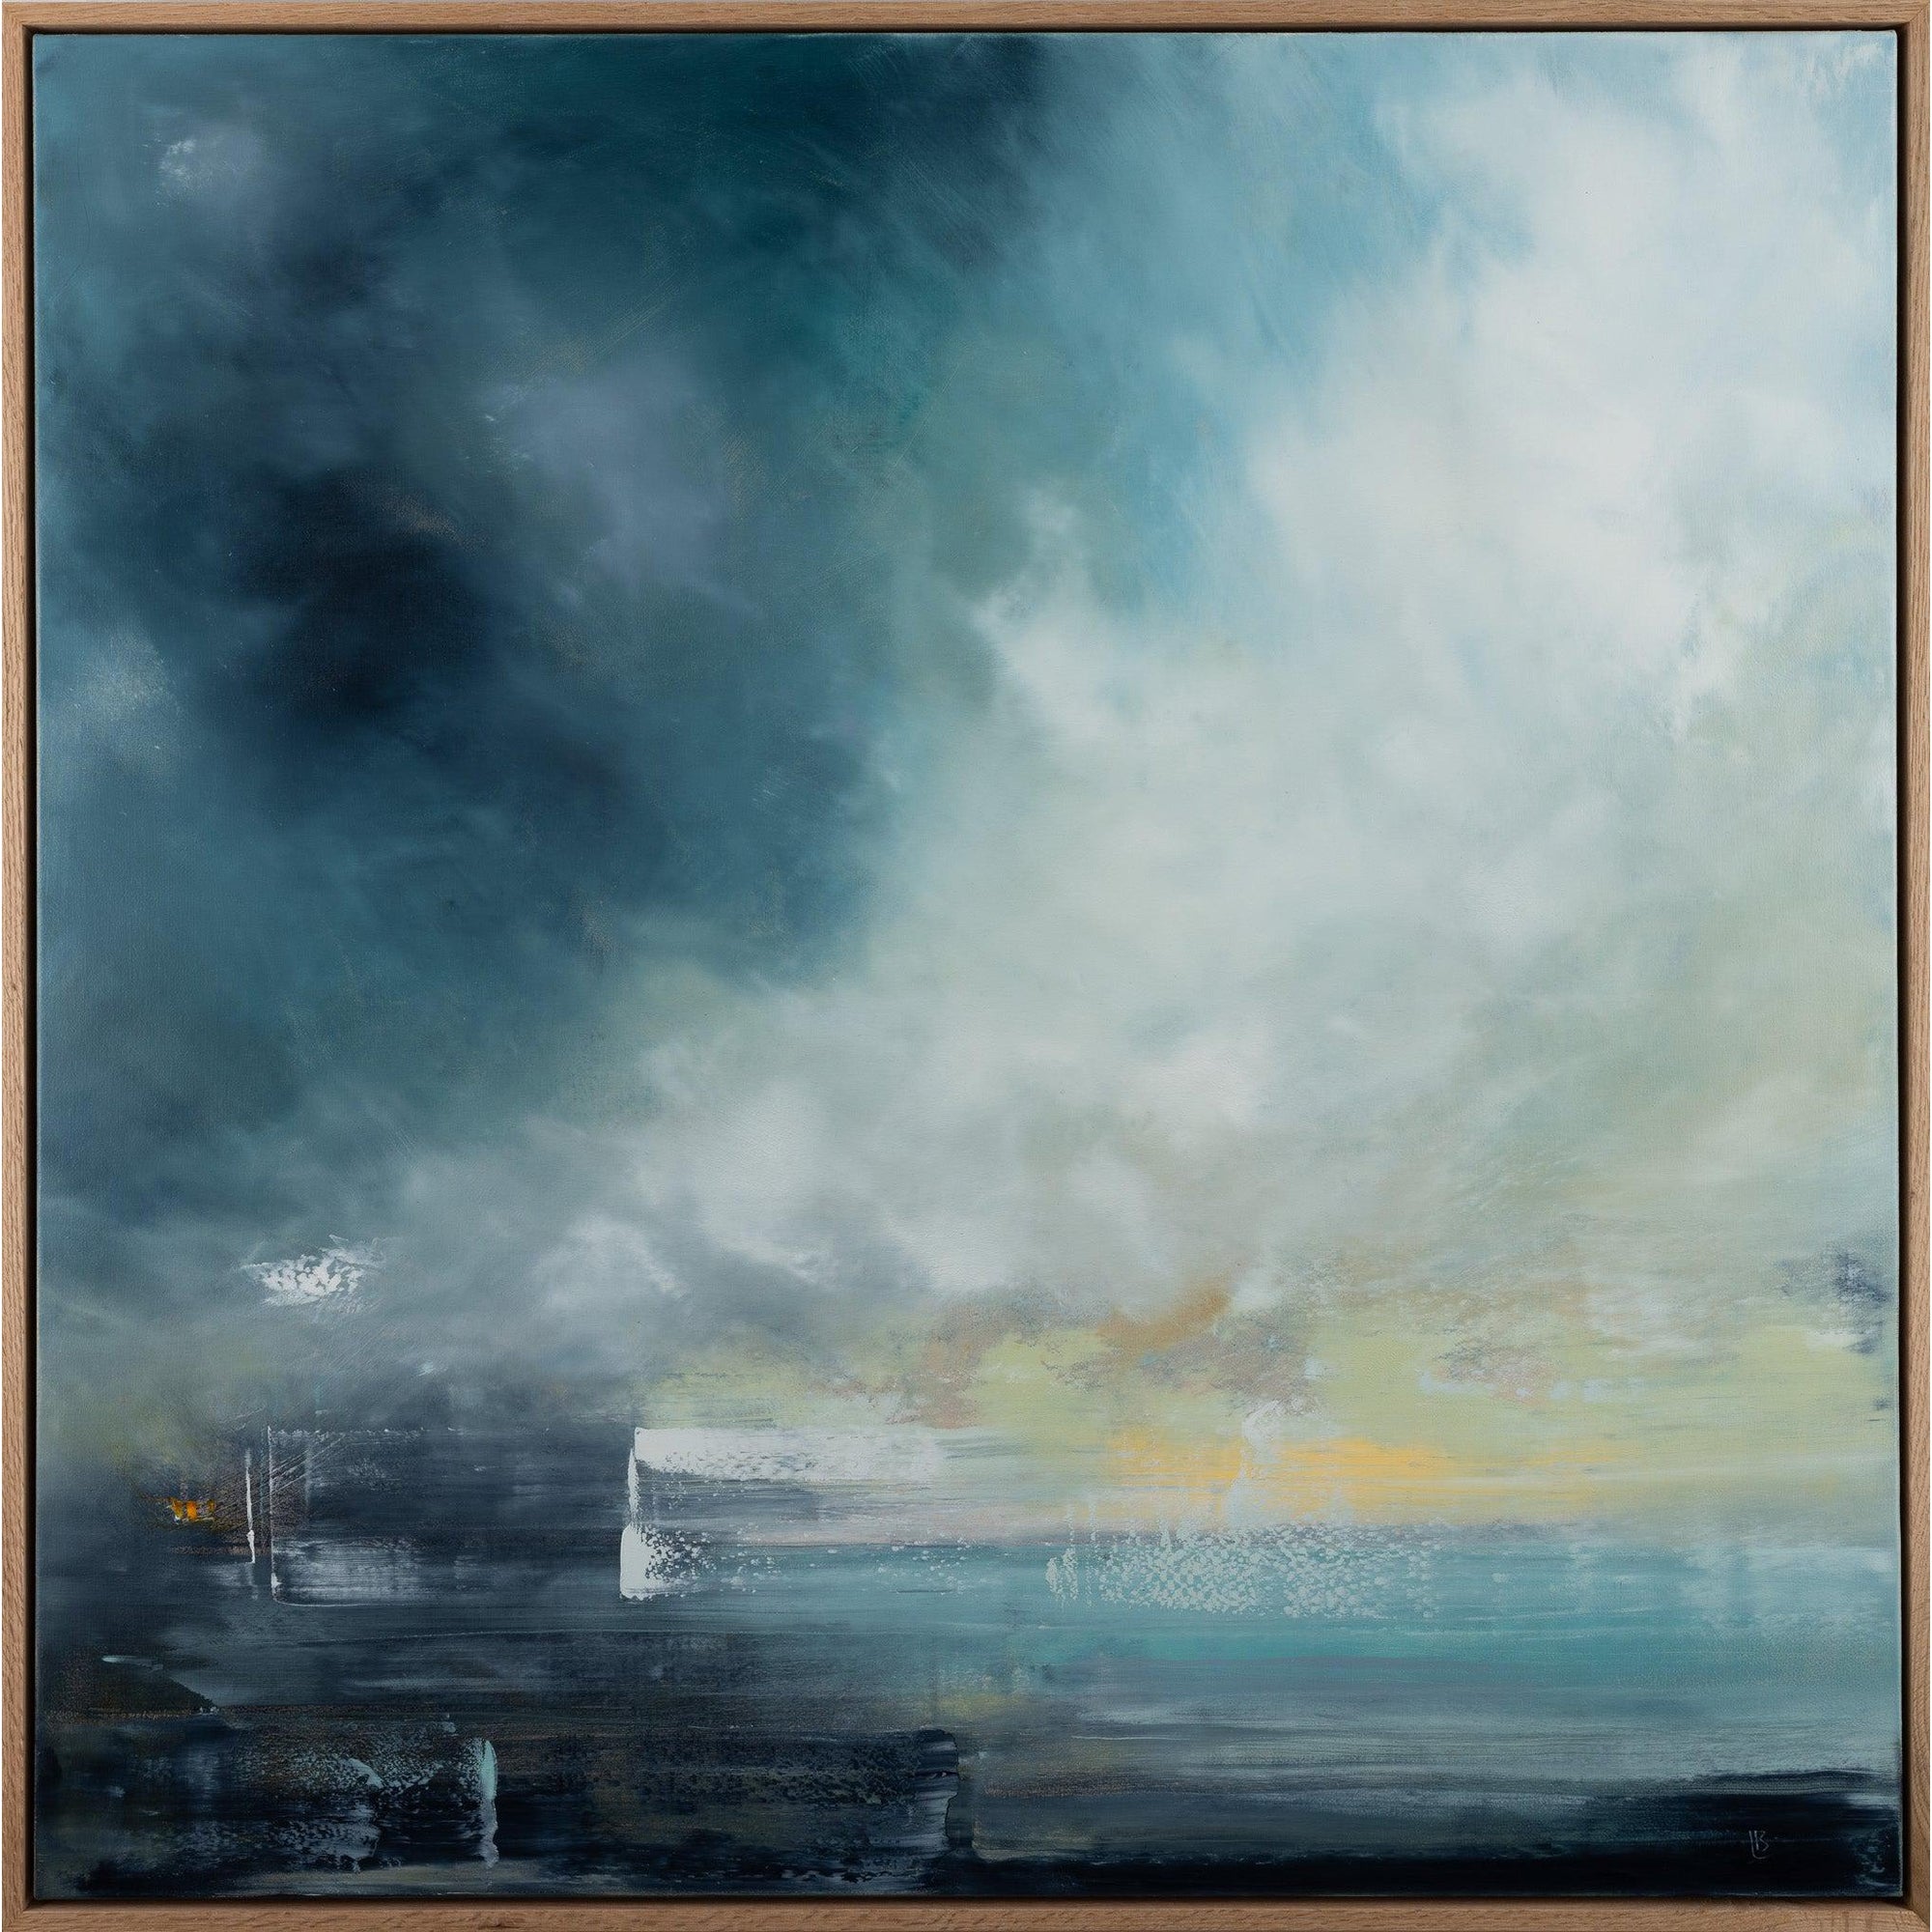 'Spring Tide/Rushing Out' oil on linen by Ben Lucas, available at Padstow Gallery, Cornwall